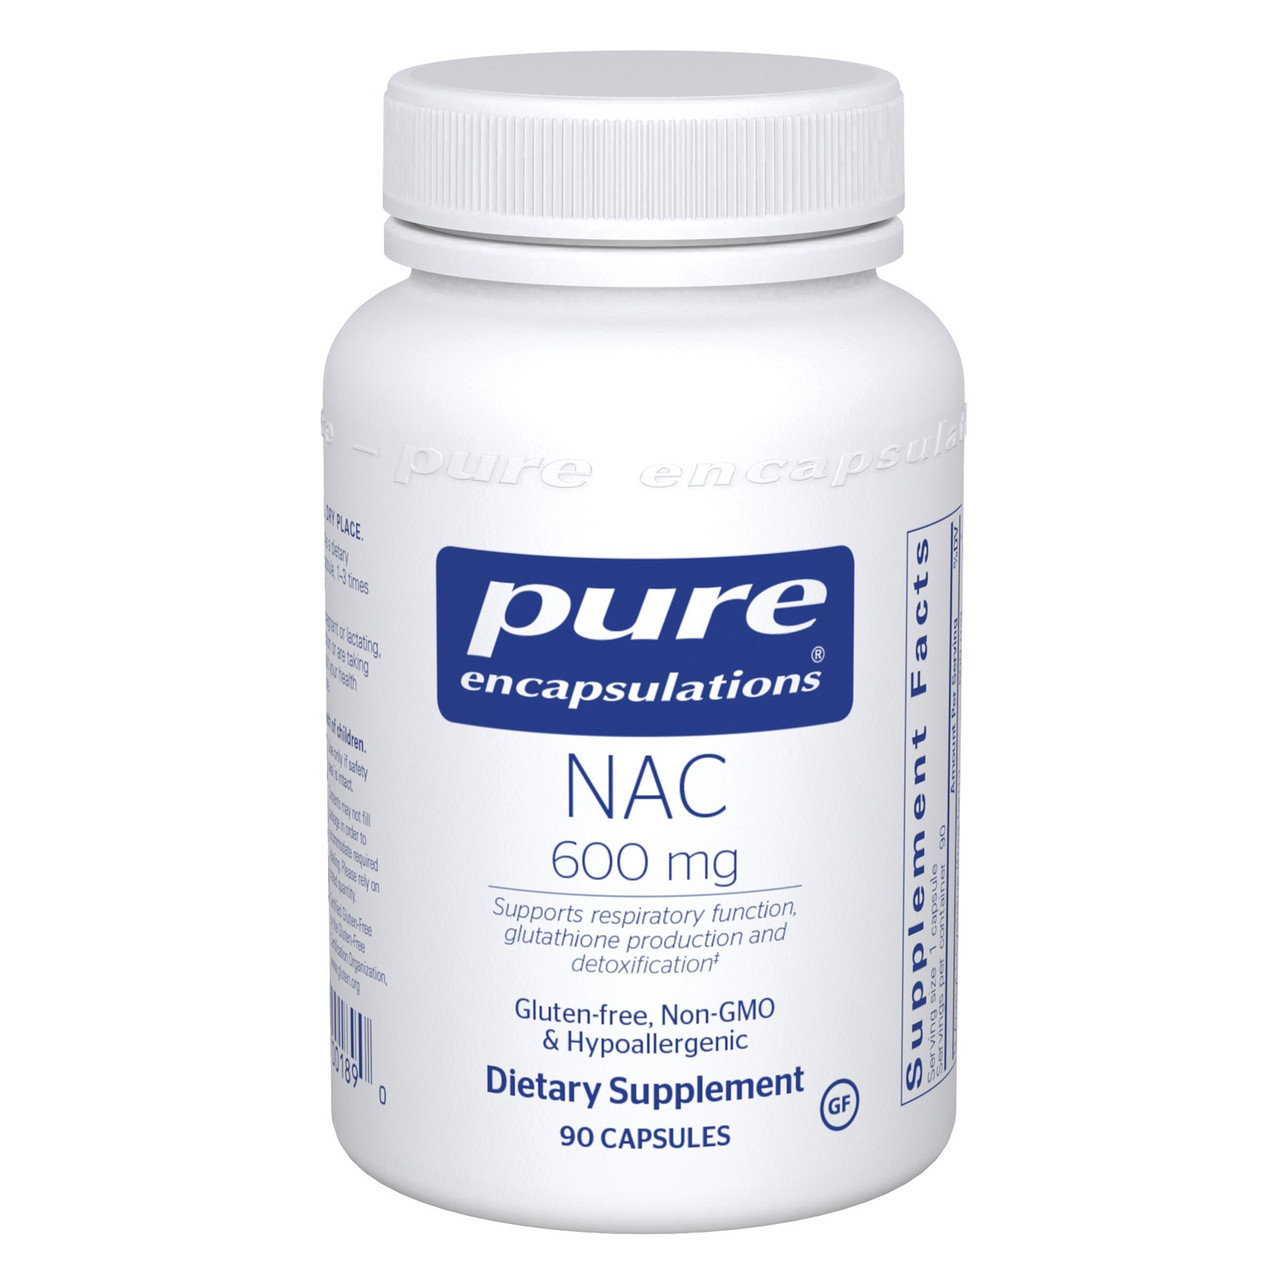 oral supplements like NAC can improve colon health